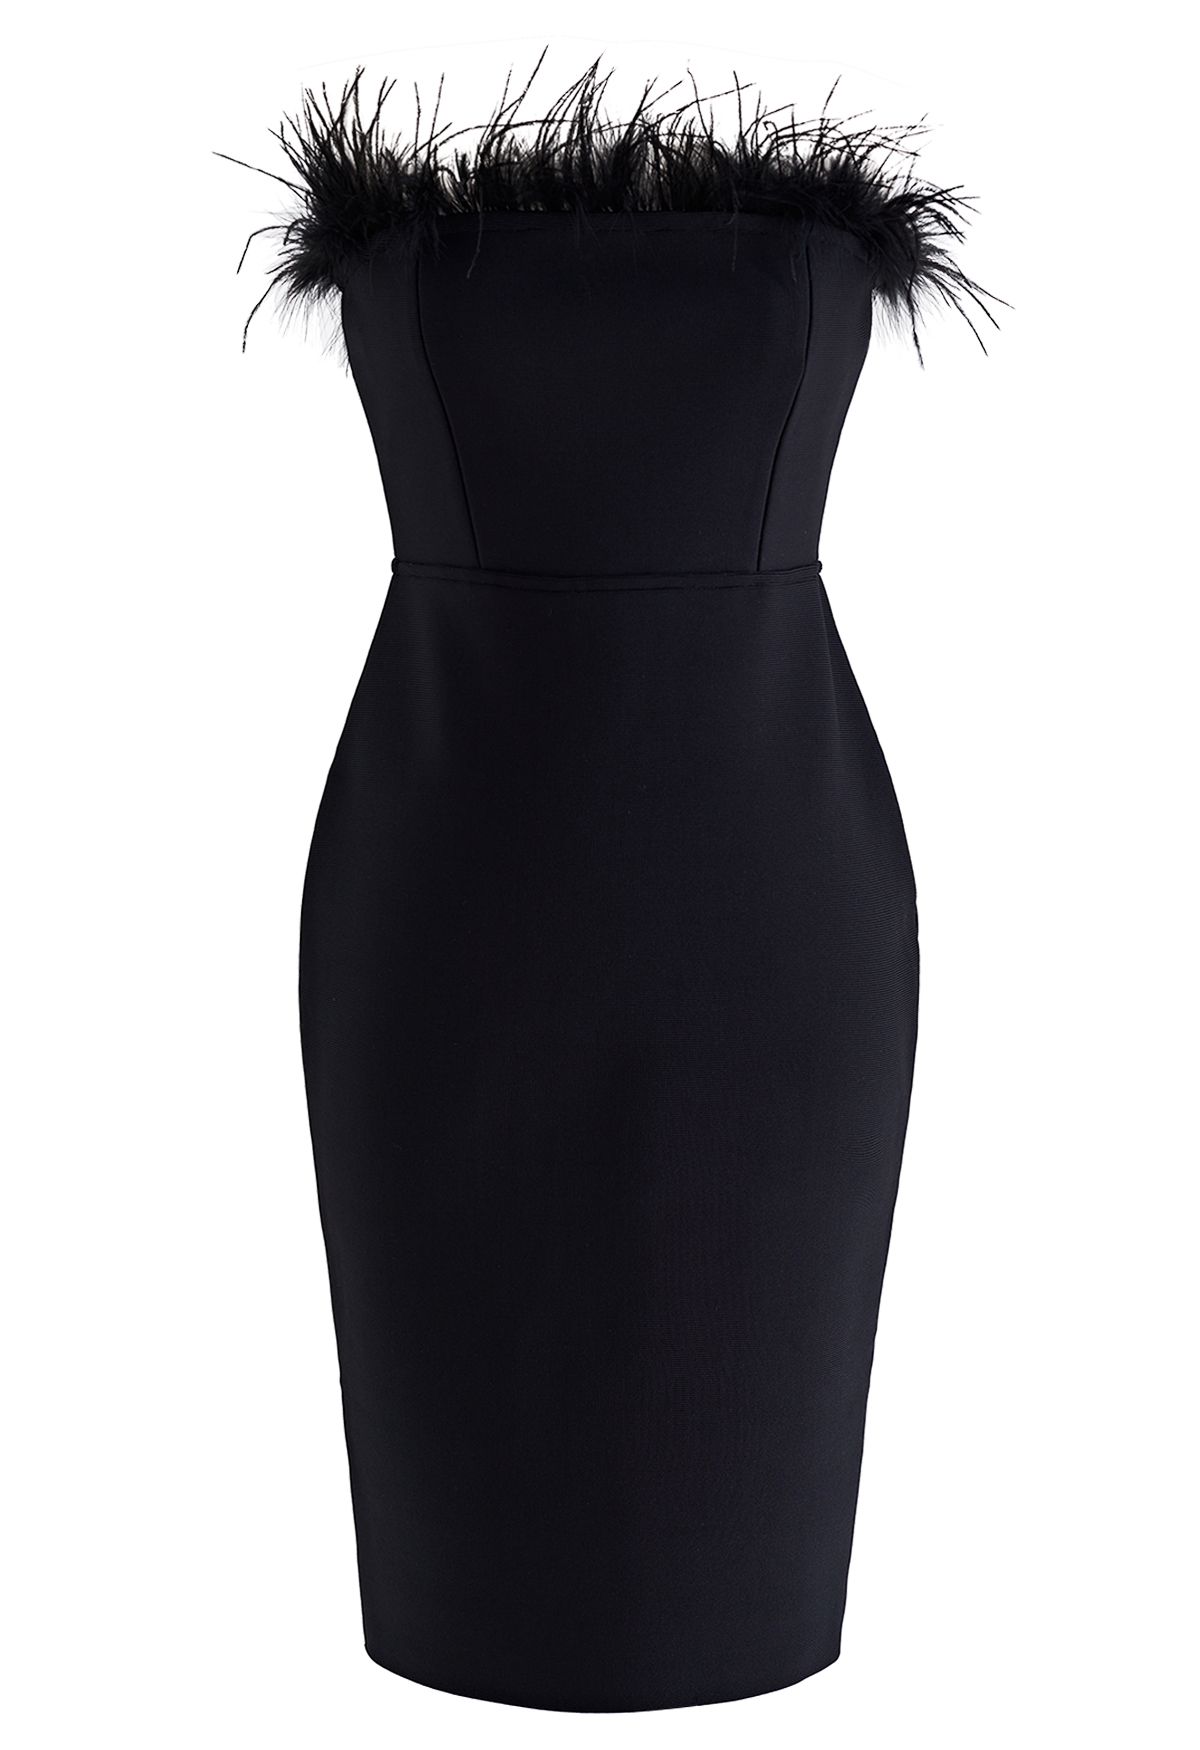 Chicwish Feather Trim Bodycon Tube Cocktail Dress in Black Black L